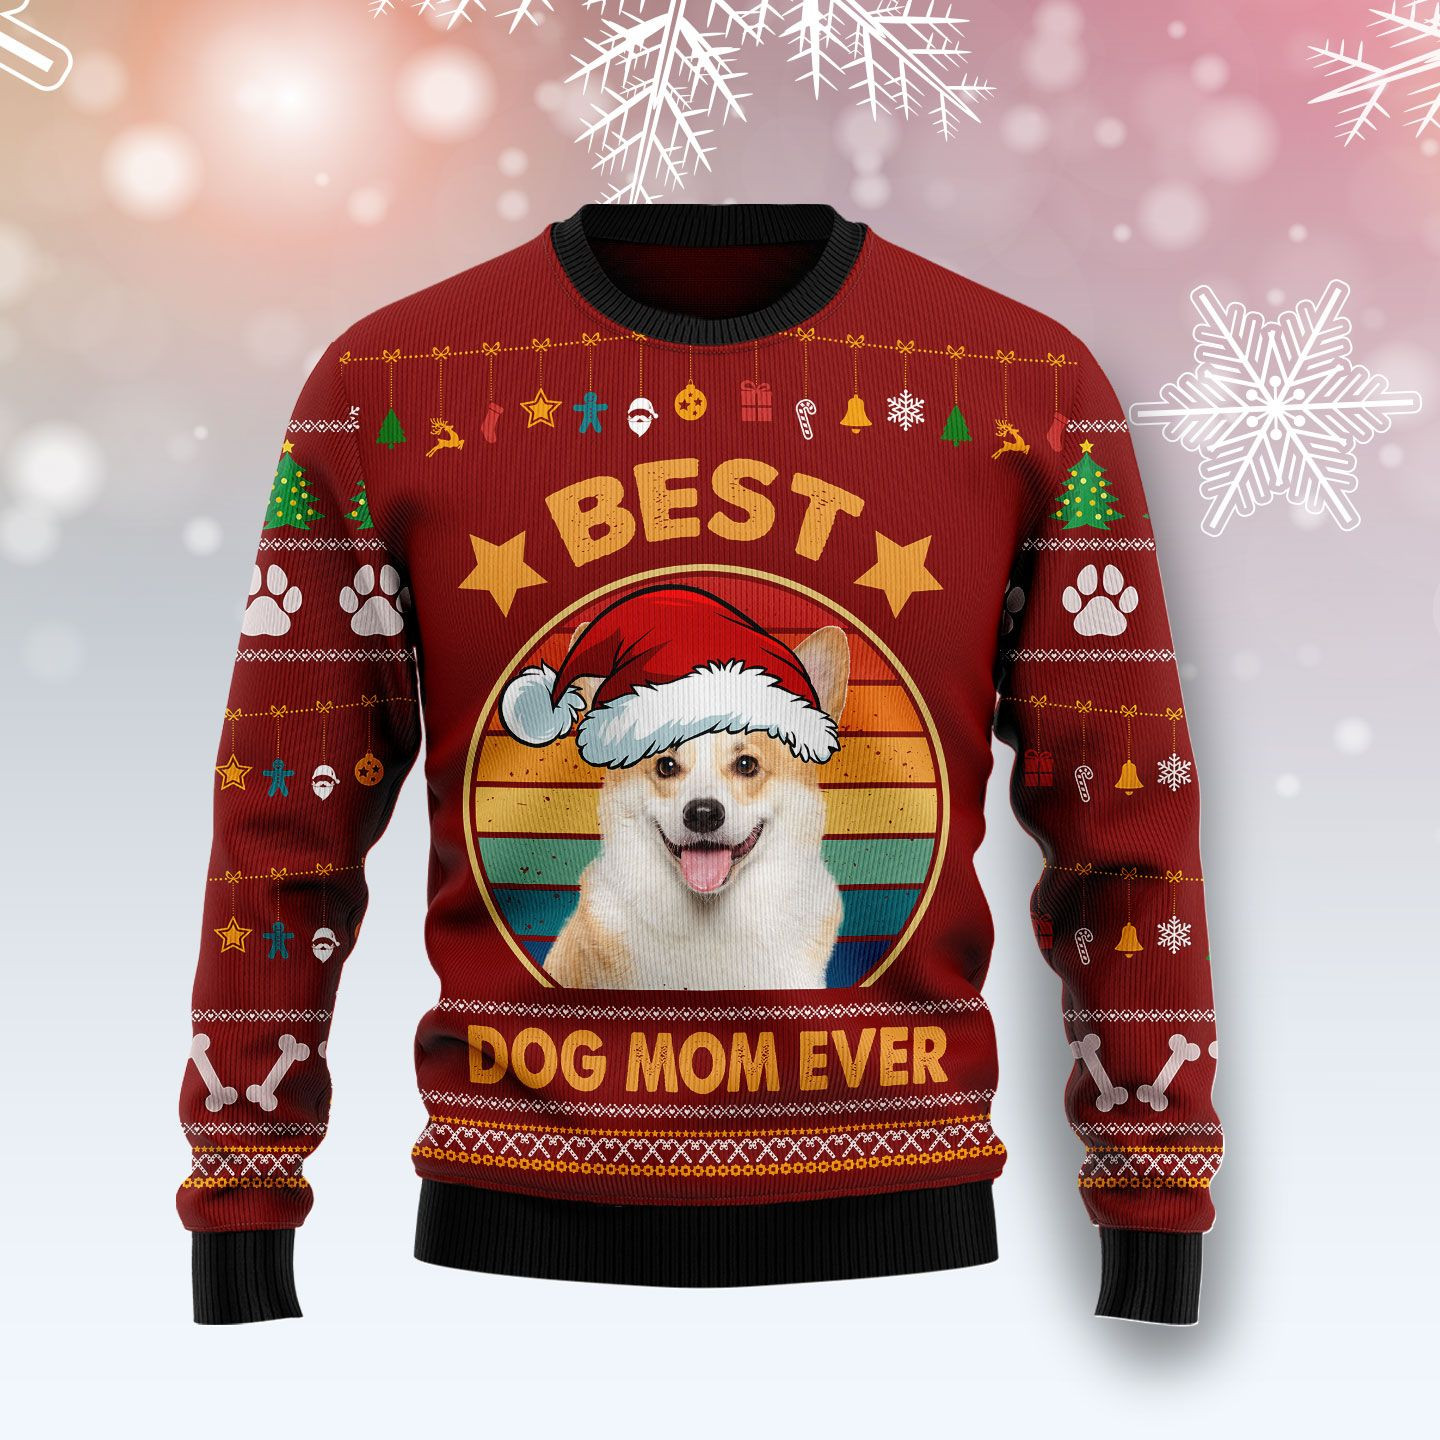 Cardigan Welsh Corgi Best Dog Mom Ever Ugly Christmas Sweater Ugly Sweater For Men Women, Holiday Sweater